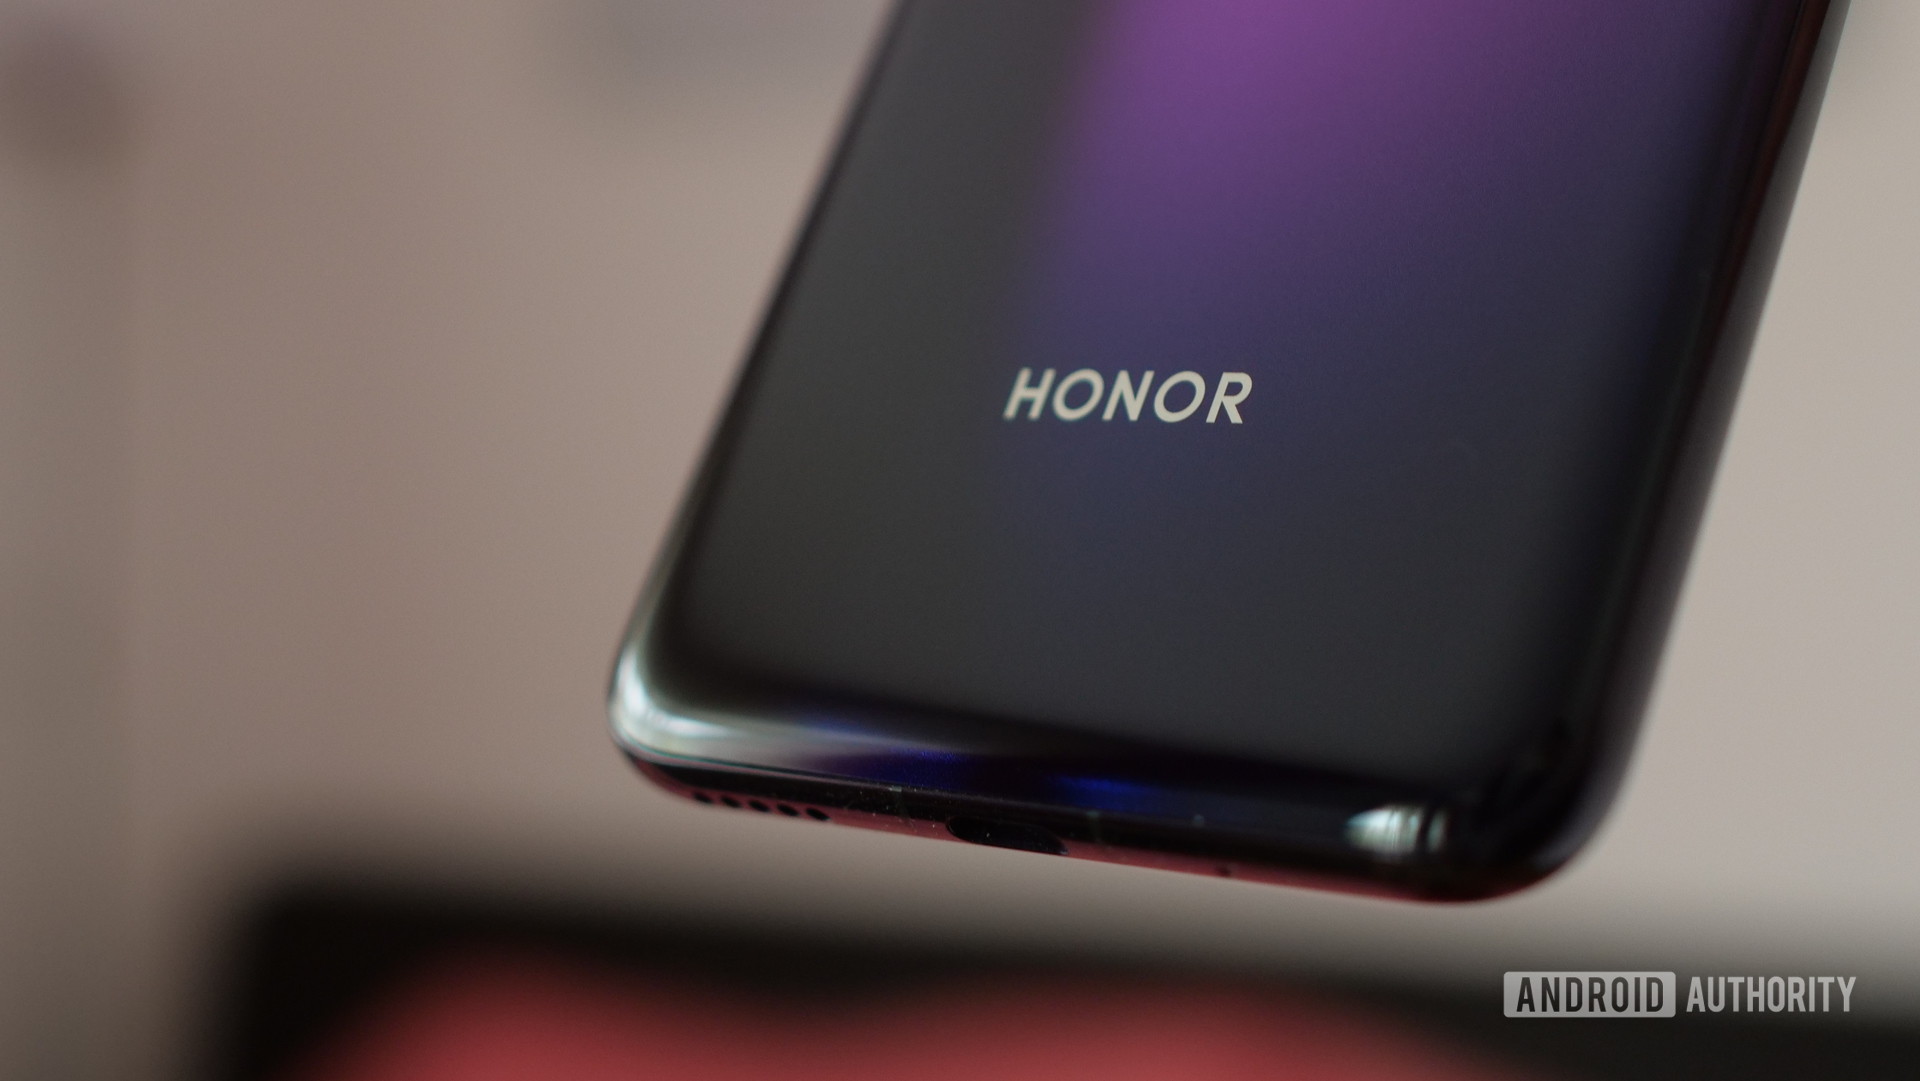 honor 20 pro with honor logo